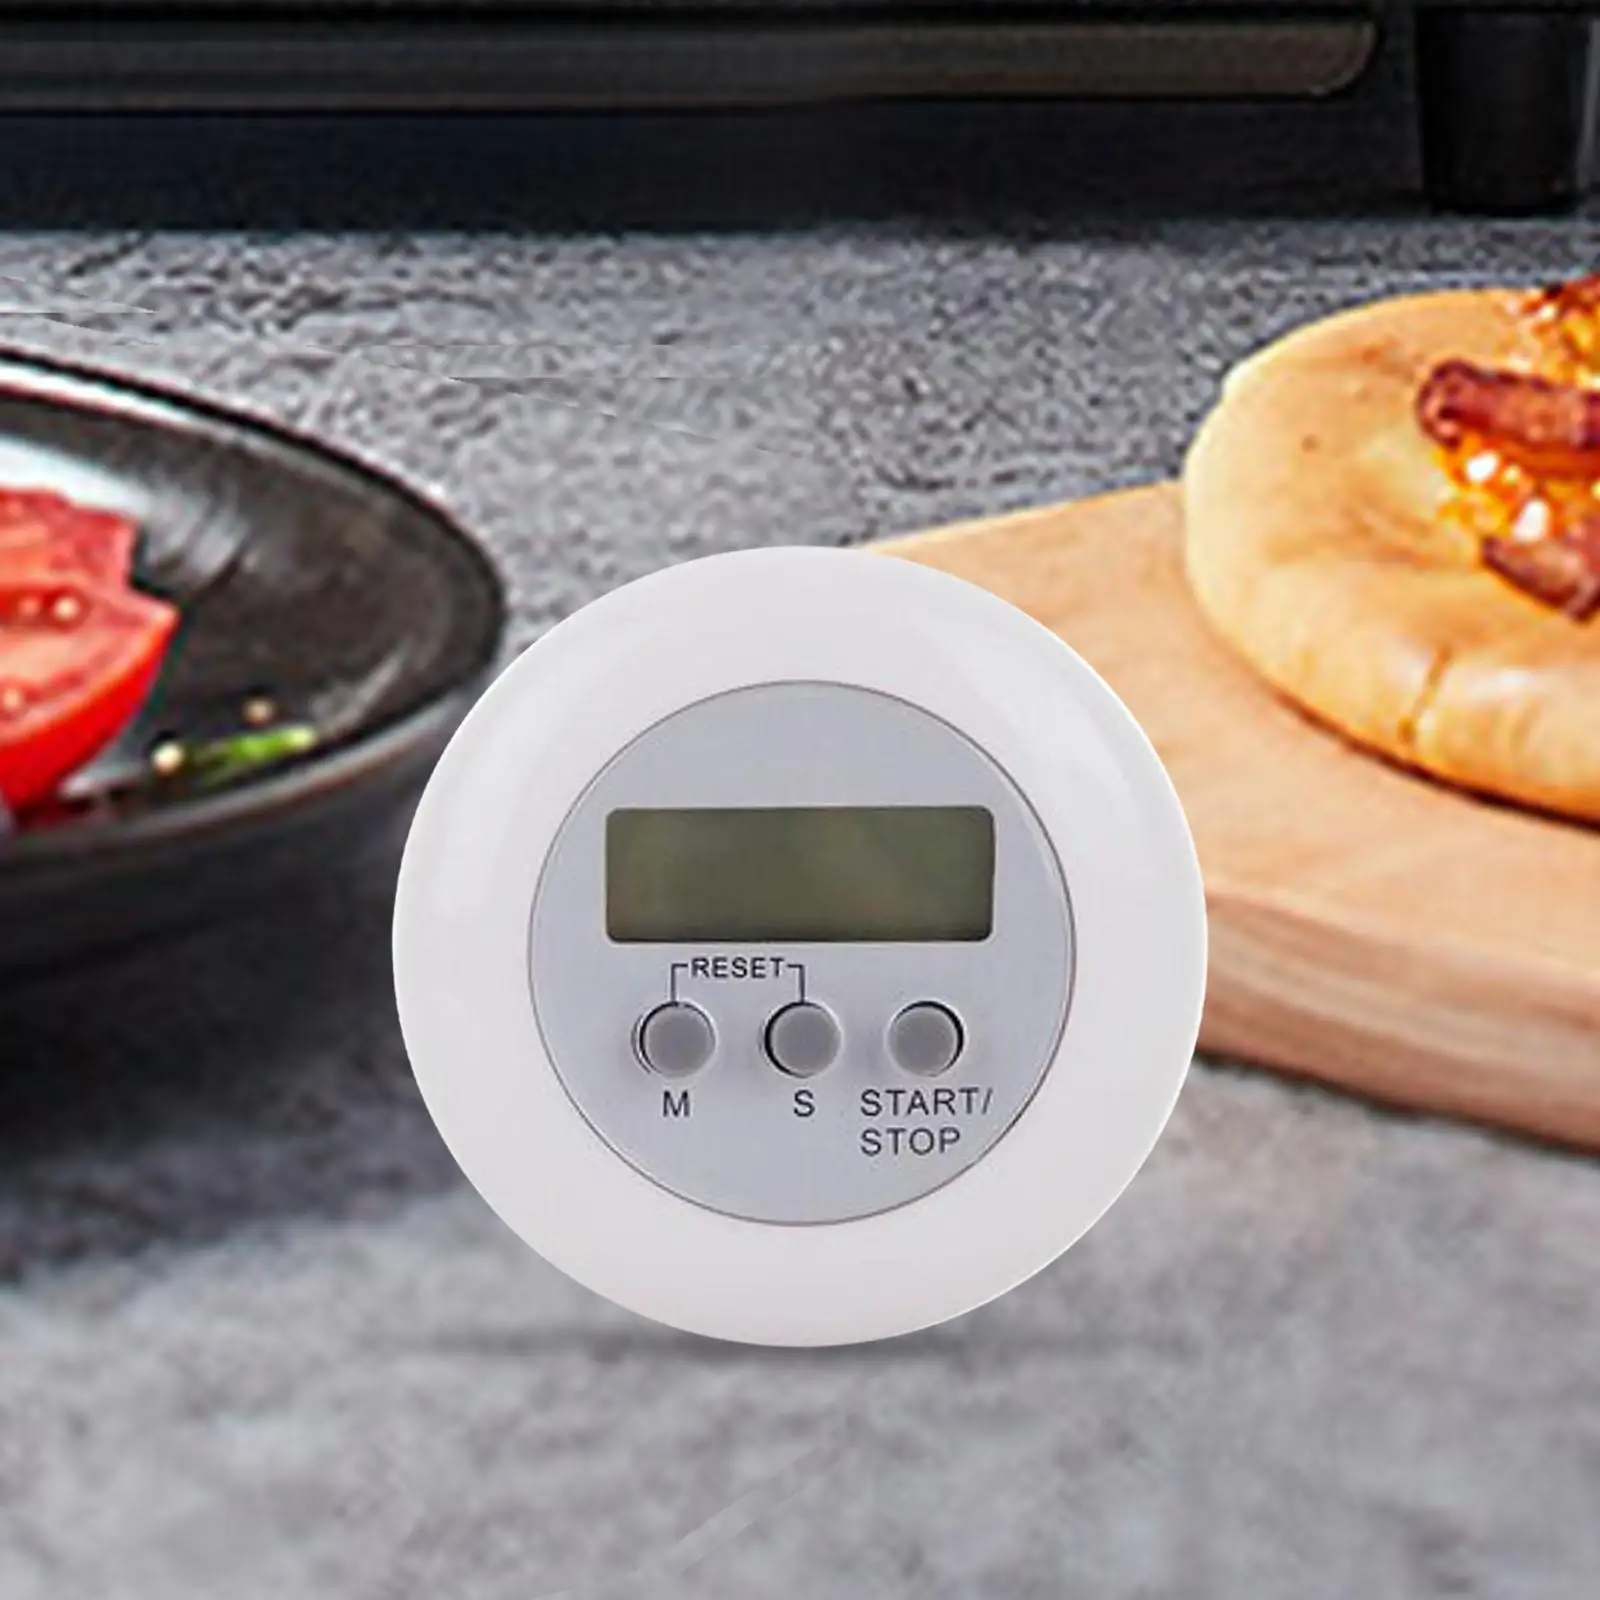 Cooking timers for Baking Kitchen Timer for Cooking for Games Baking Cooking